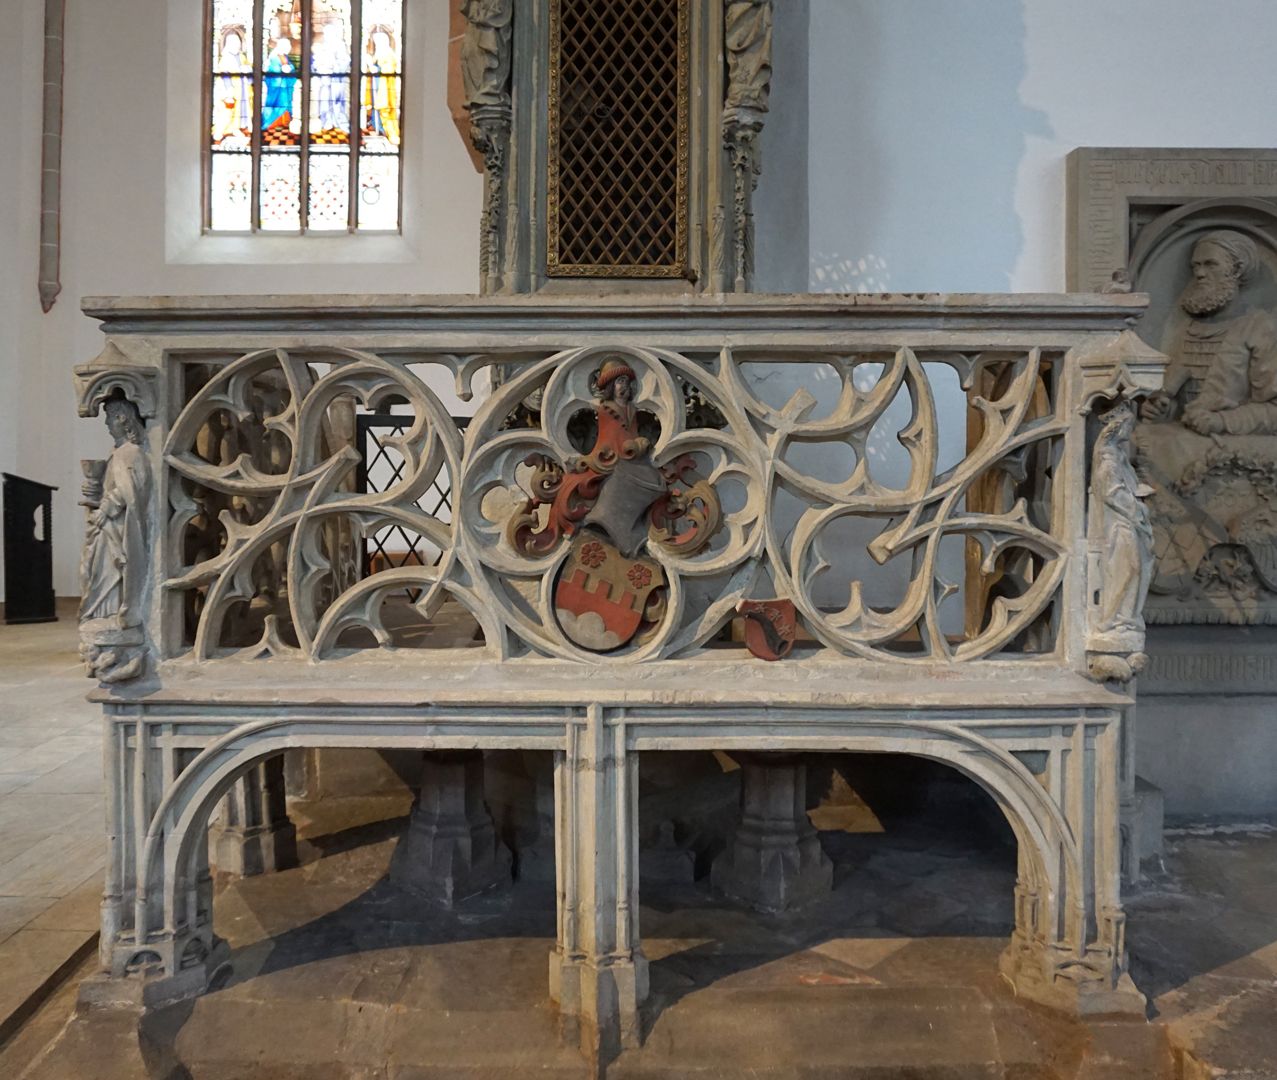 Sacrament house in Schwabach Tracery with the donors' coat of arms: The large coat of arms belongs to the mint master Hans Rosenberg and the small one to his wife Dorothea von Bolstatt